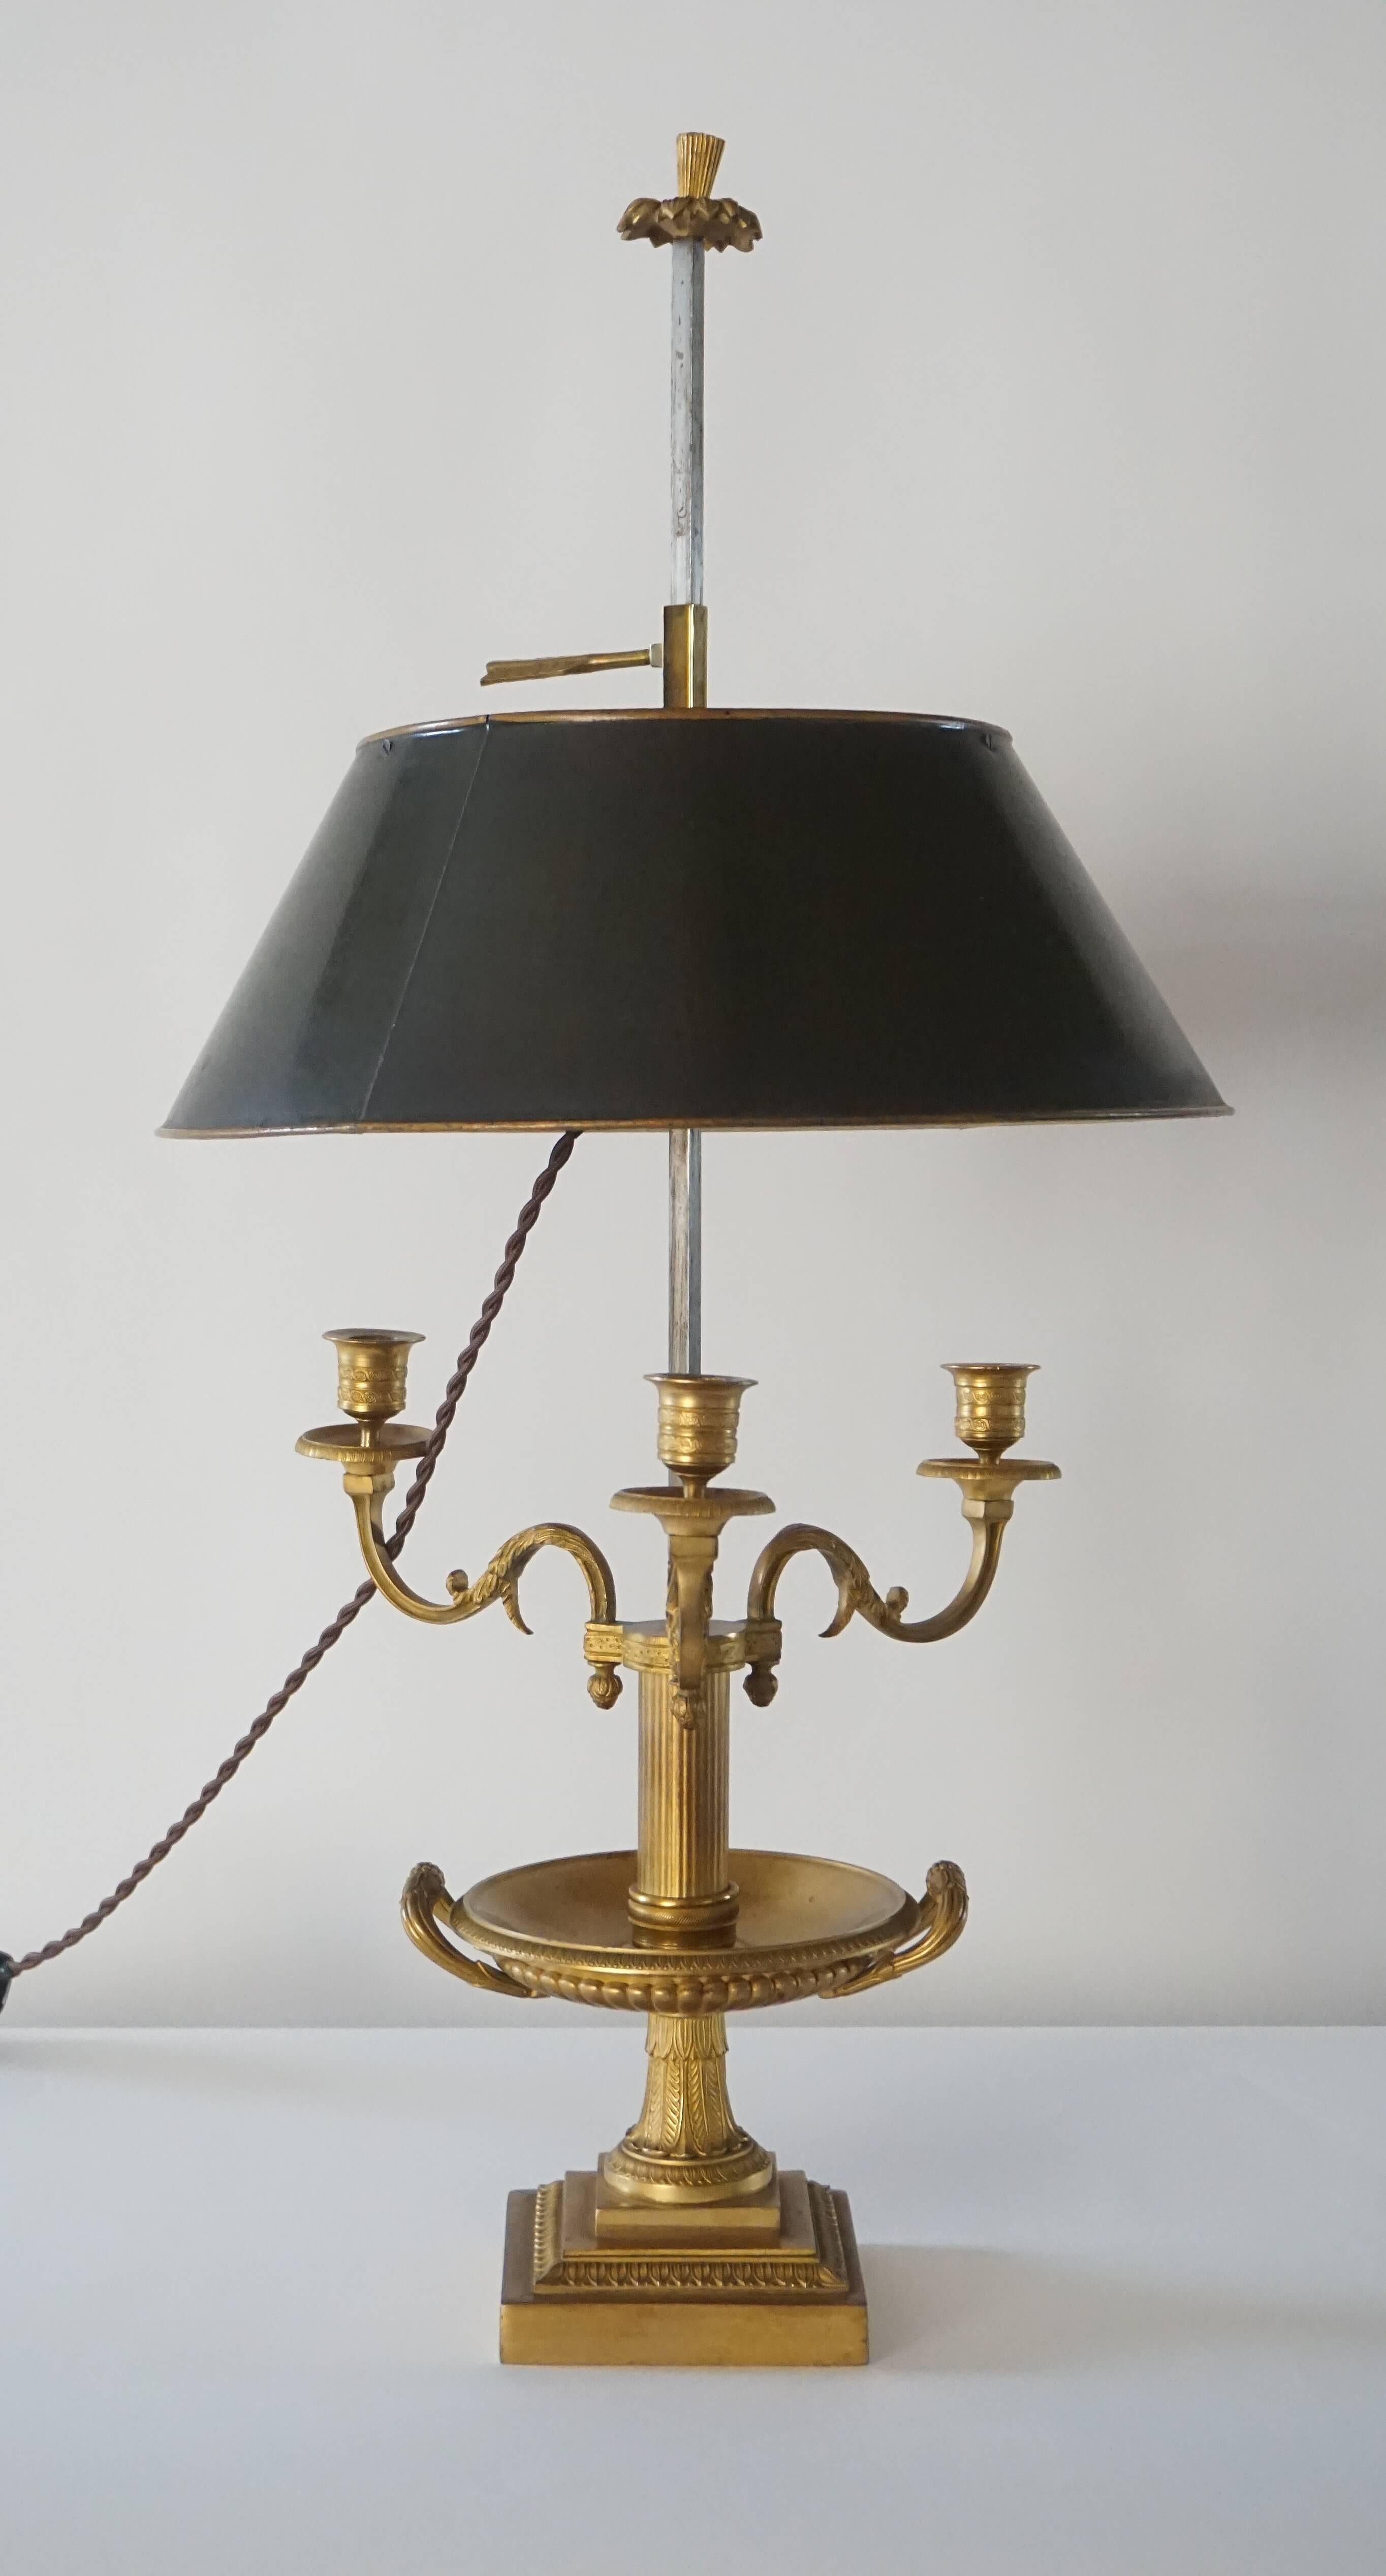 French Directoire, early Empire period gilt bronze bouillotte lamp having fluted tazza-form base issuing three scrolling candle arms and thistle-finial topped steel standard with round green tole shade.  Electrified socket-cluster can easily be